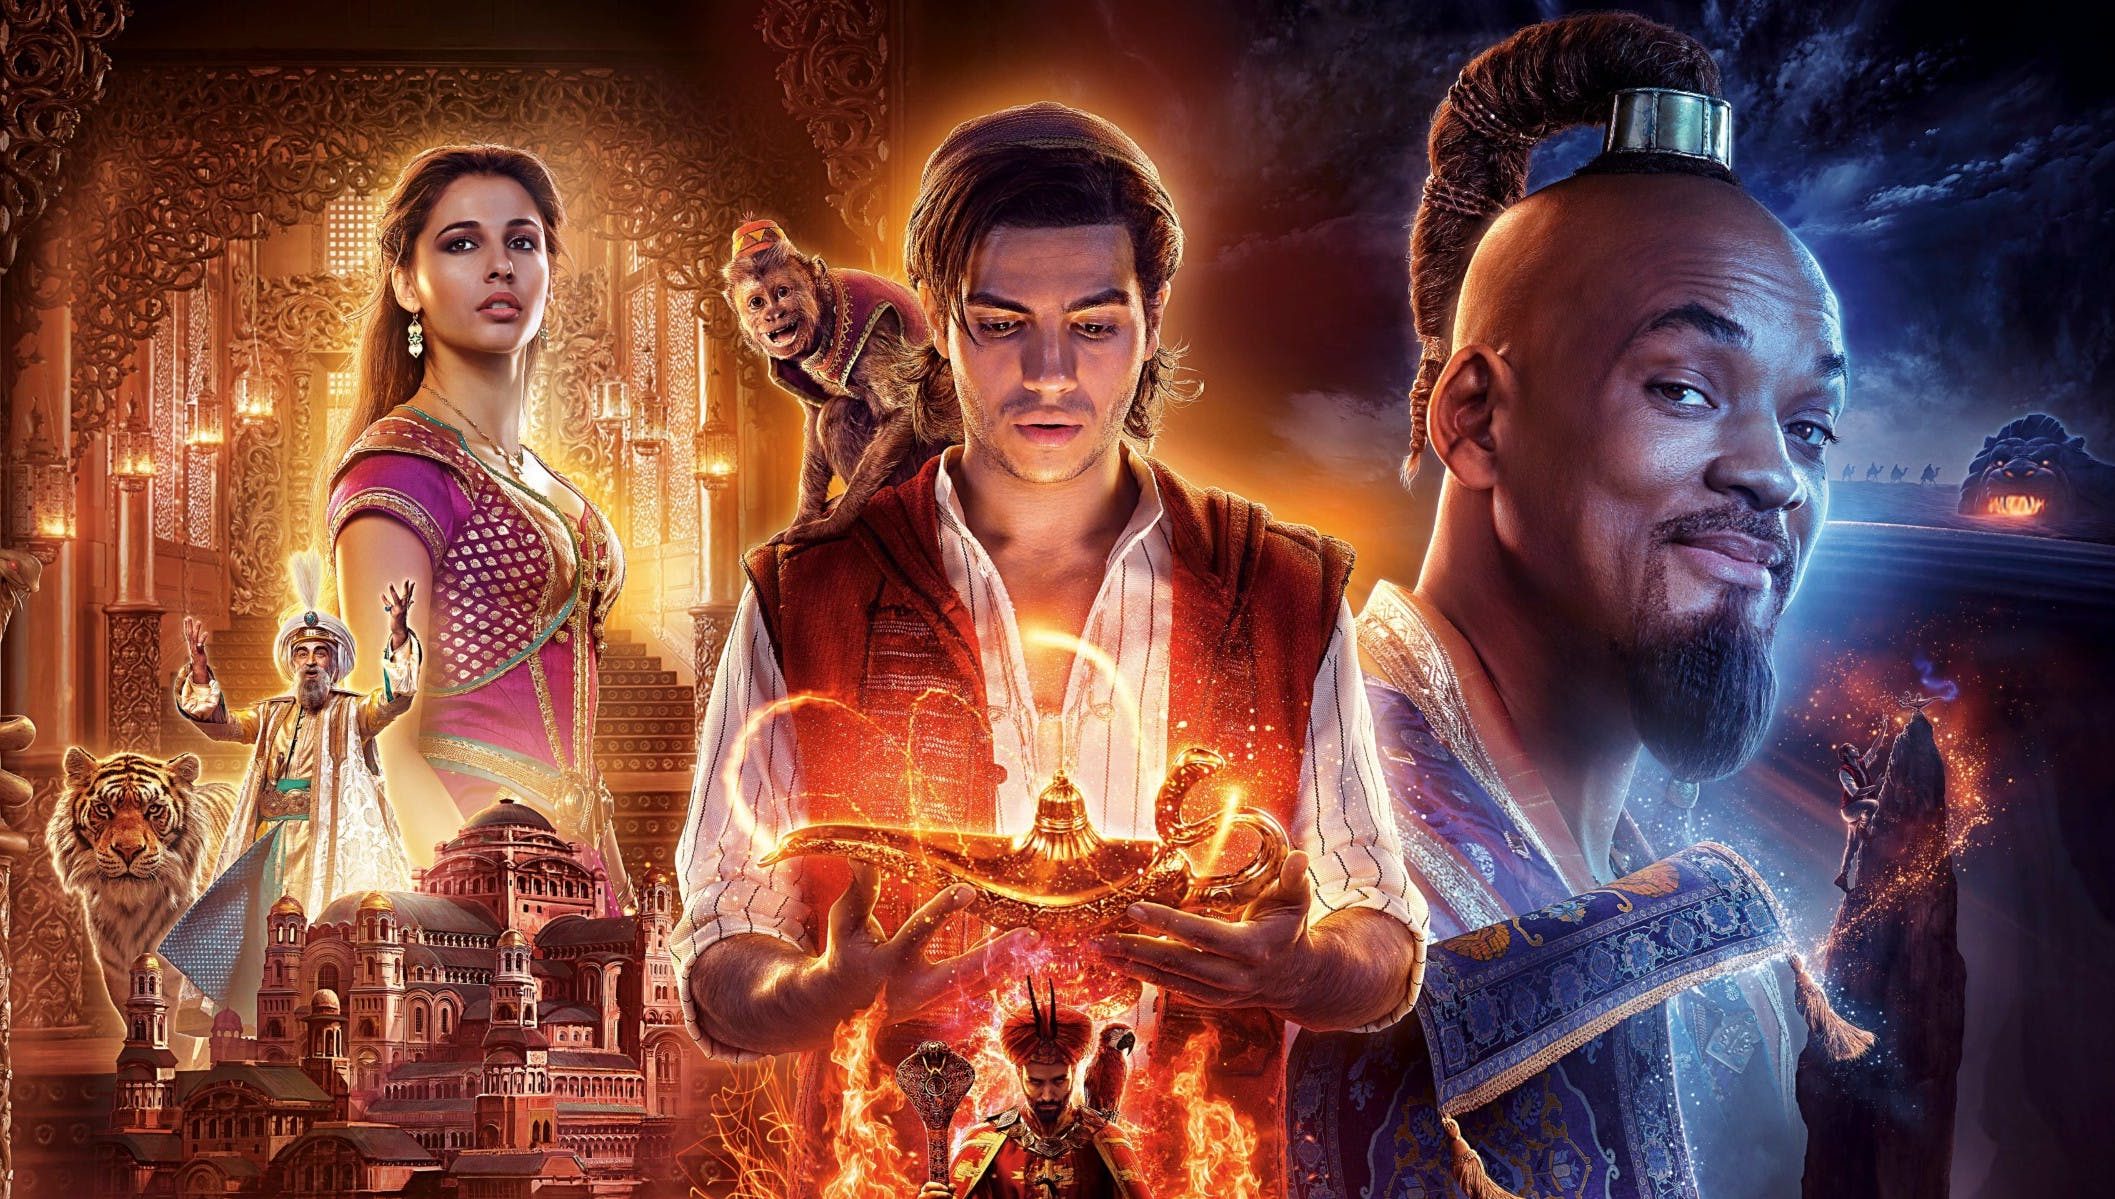 Disney's 'Aladdin': Diving Into a Tale of American Orientalism